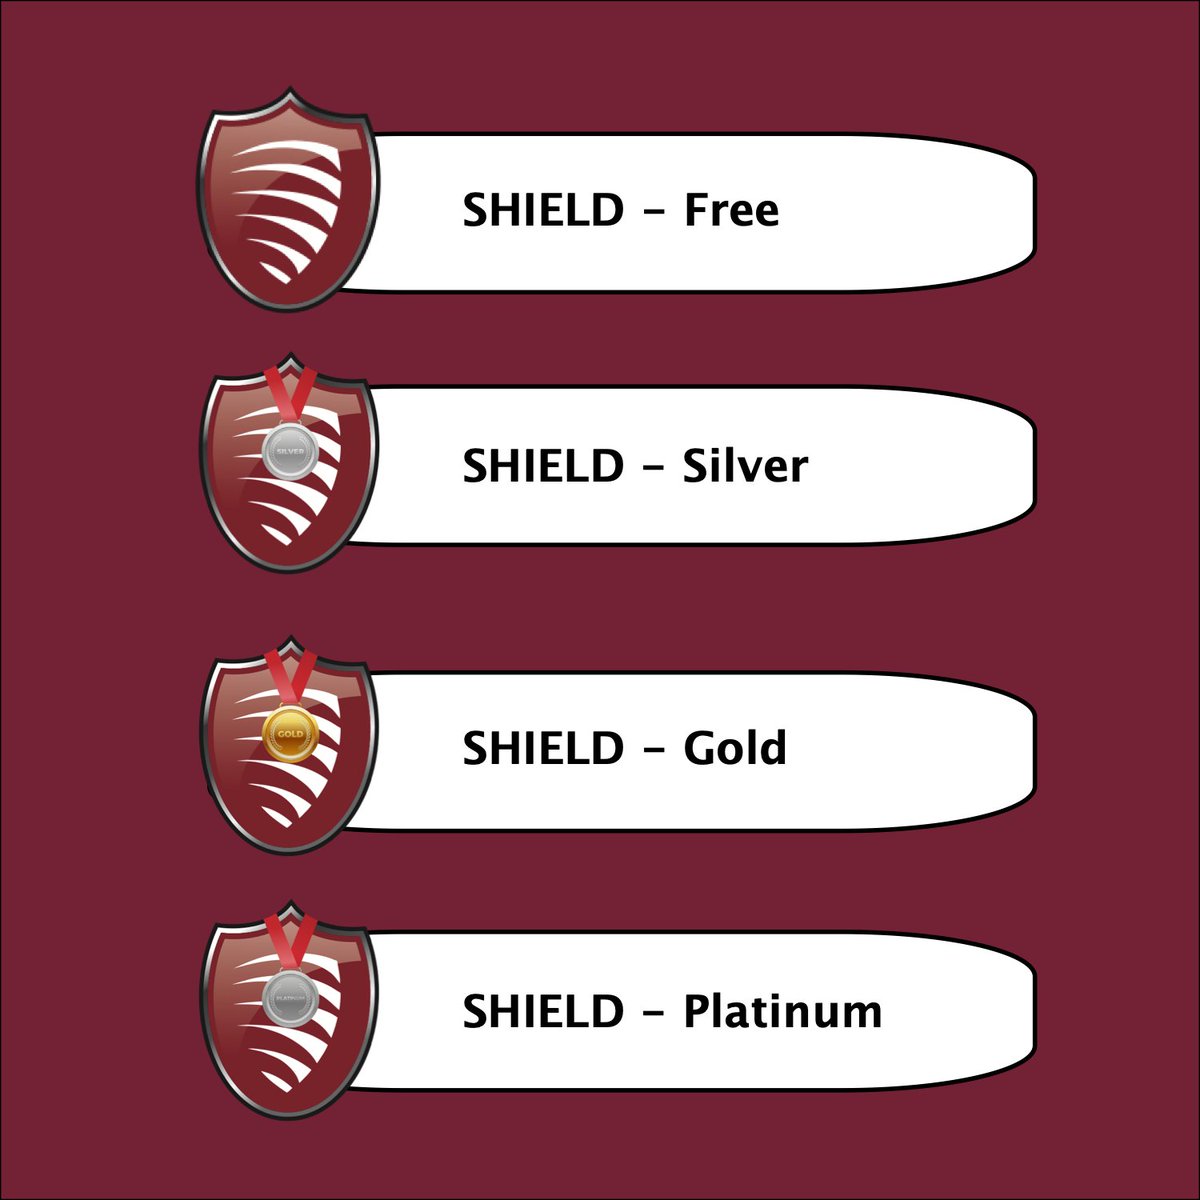 Compare our SHIELD #BusinessContinuity software to choose what best fits your company. All plans are built based on our 30+ years experience as BC Planners, designing SaaS software & client feedback from countless onsite engagements. kingsbridgebcp.biz/44V3Gt7 #KISSBCP